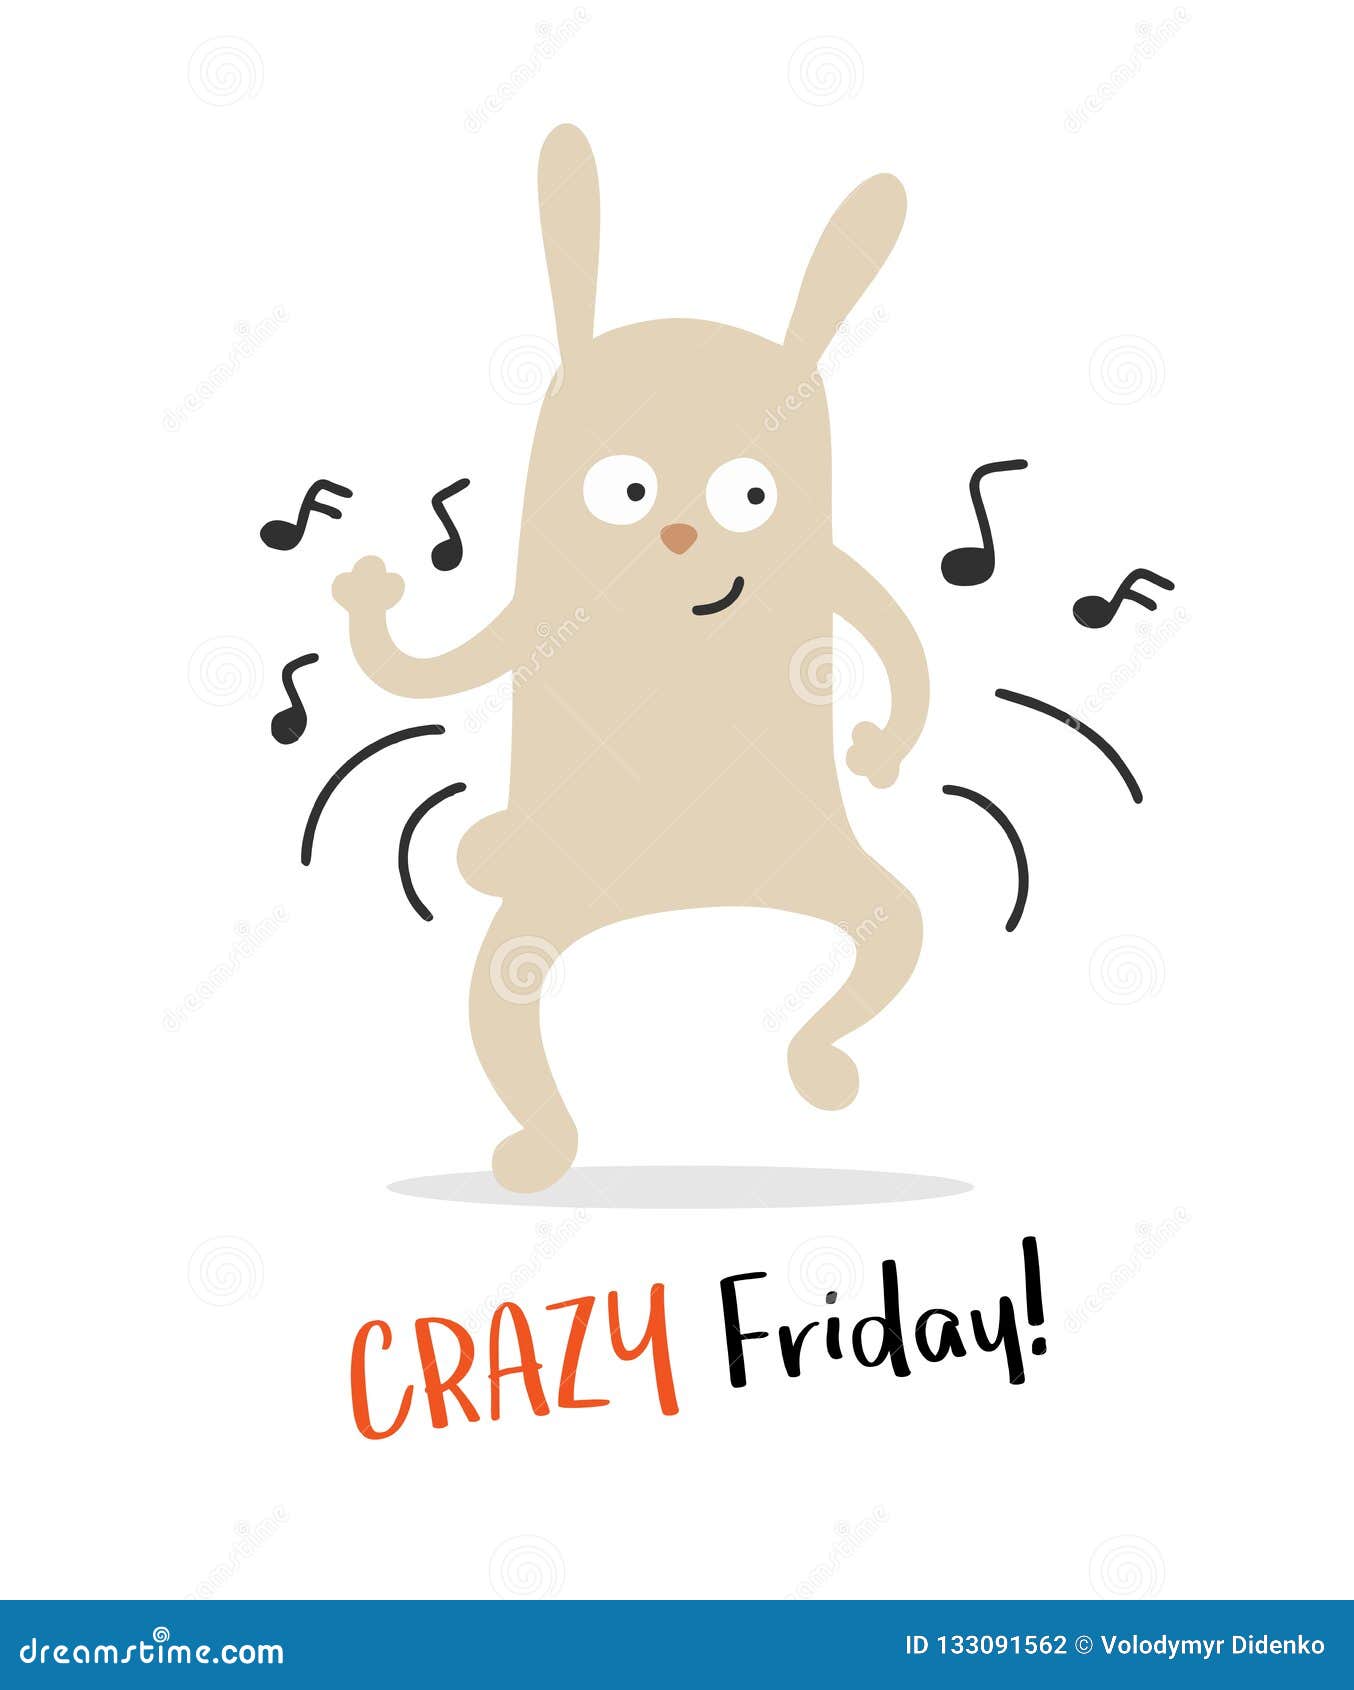 Cute Funny Bunny Dancing on Crazy Friday Night. Flat Vector Animal Cartoon  Illustration Card Stock Vector - Illustration of poster, colored: 133091562